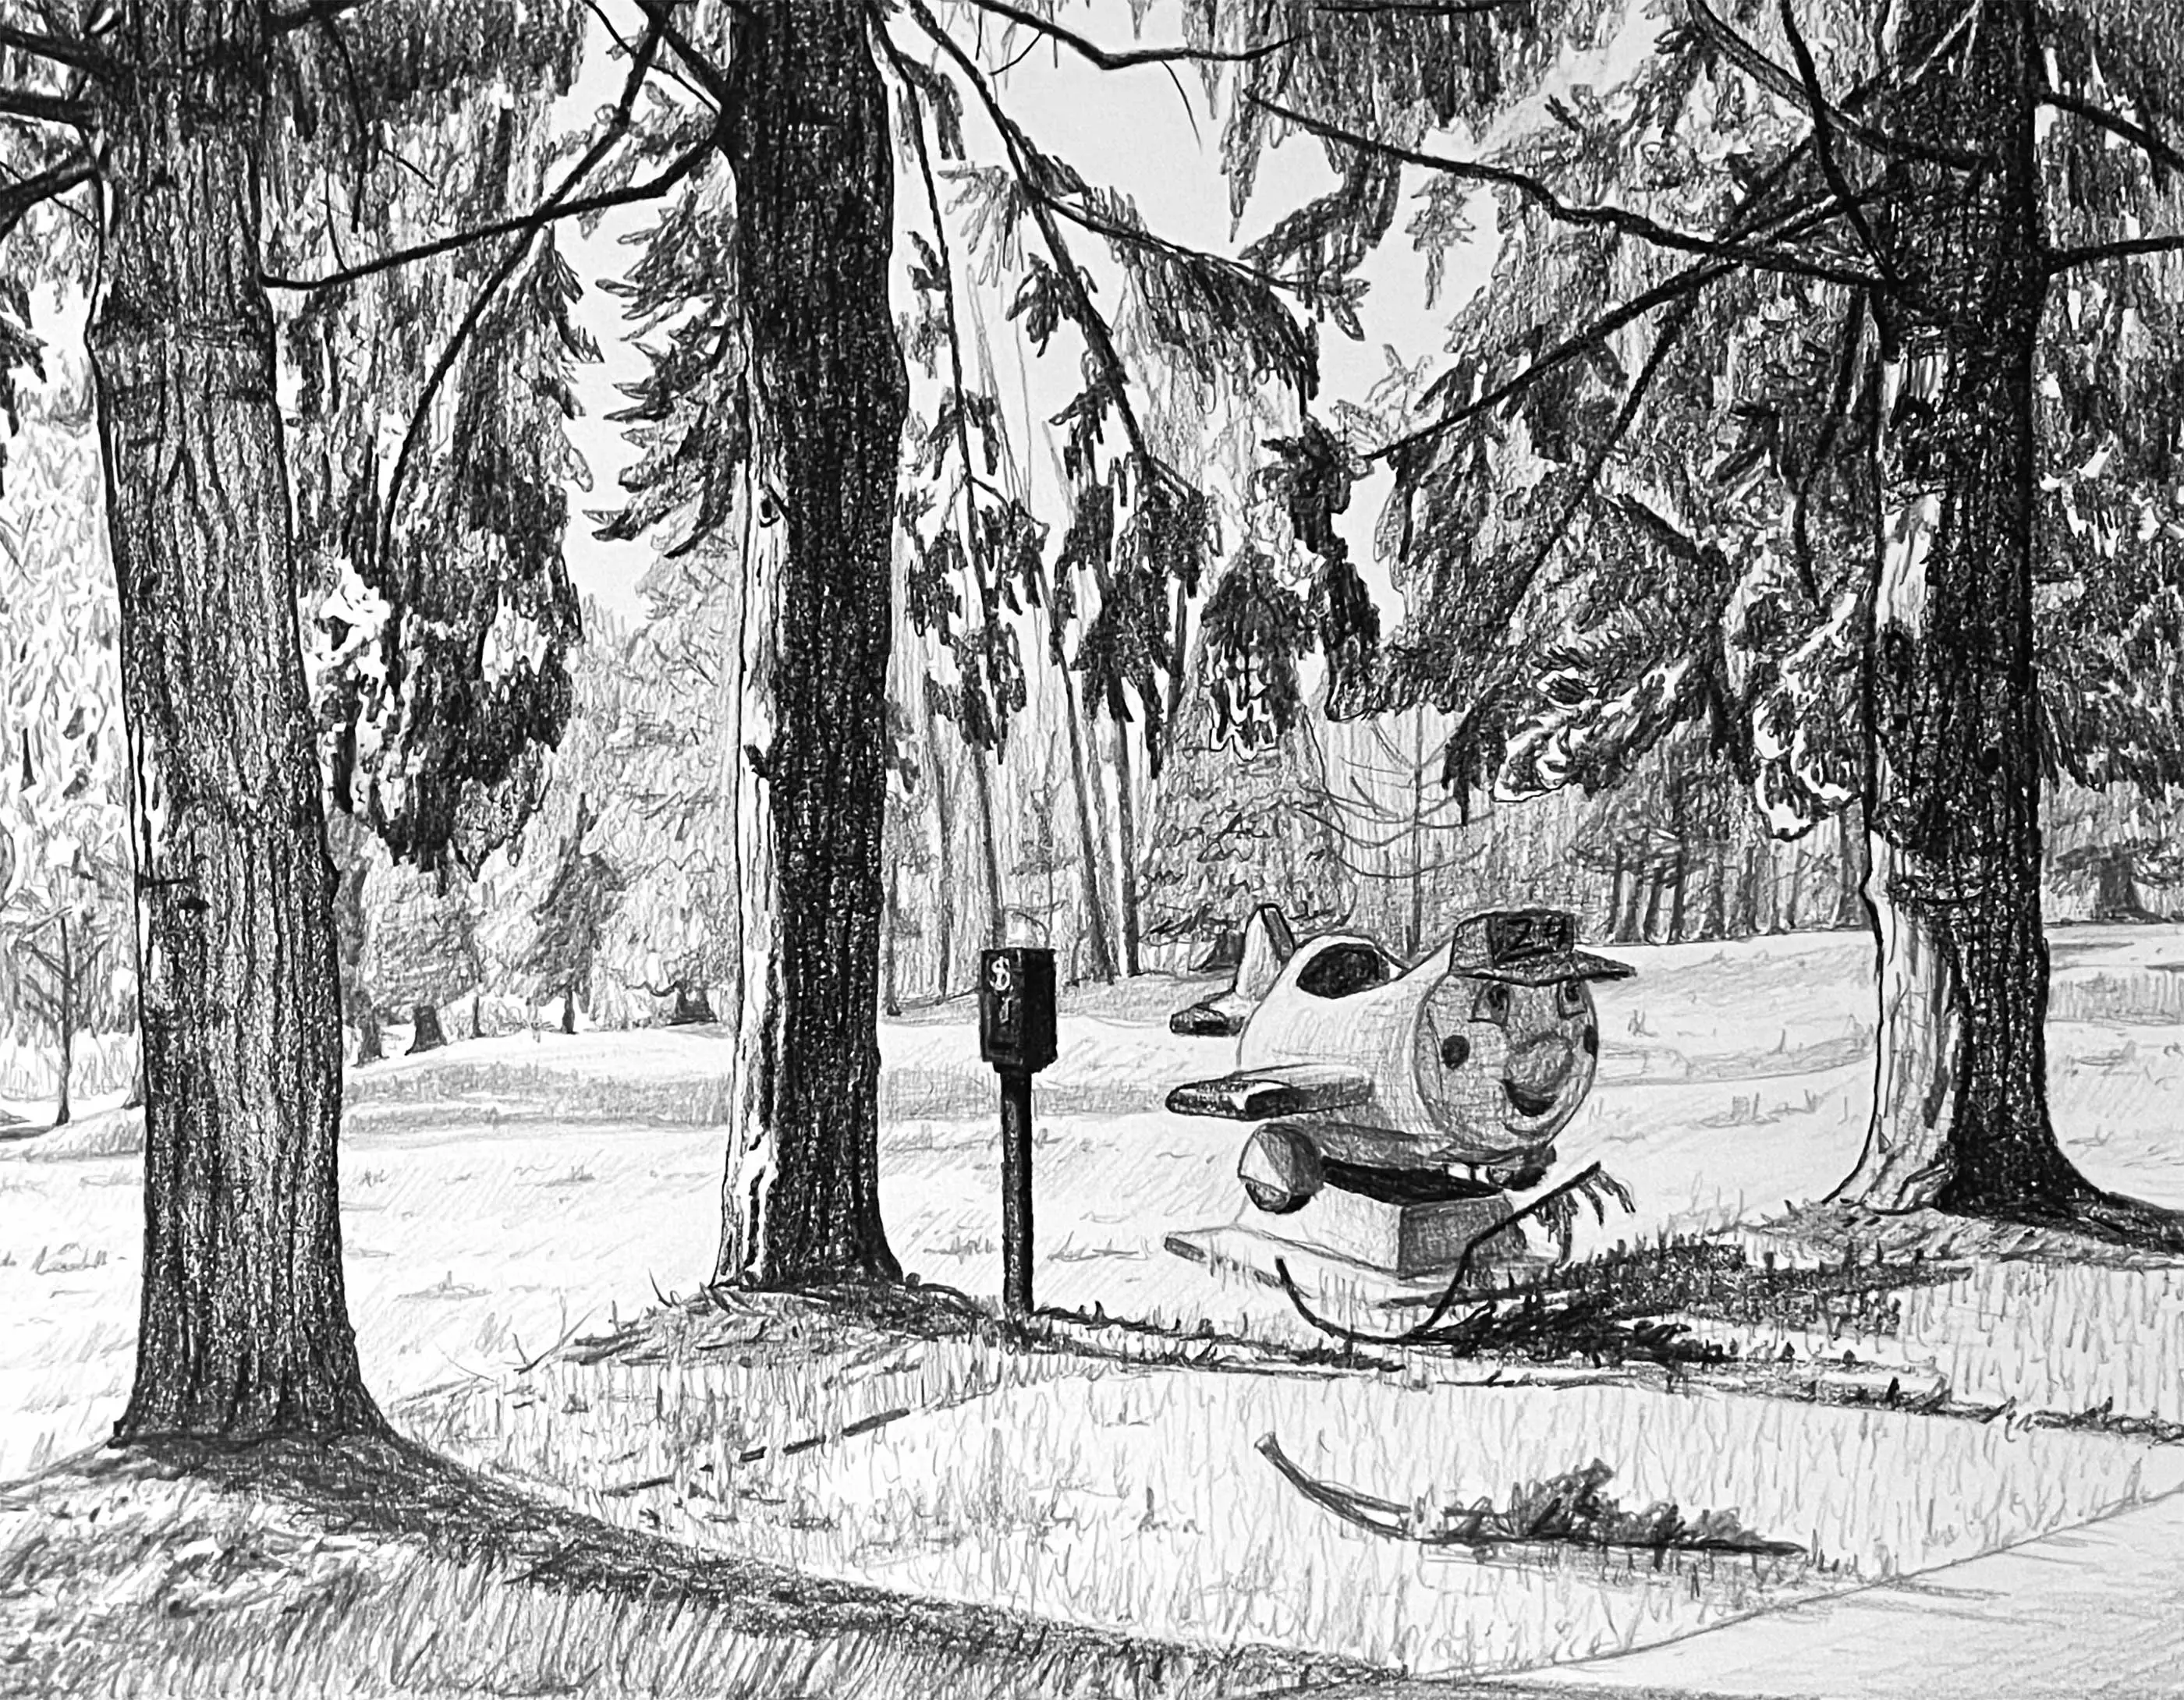 A drawing of a coin operated ride in the middle of the forest.